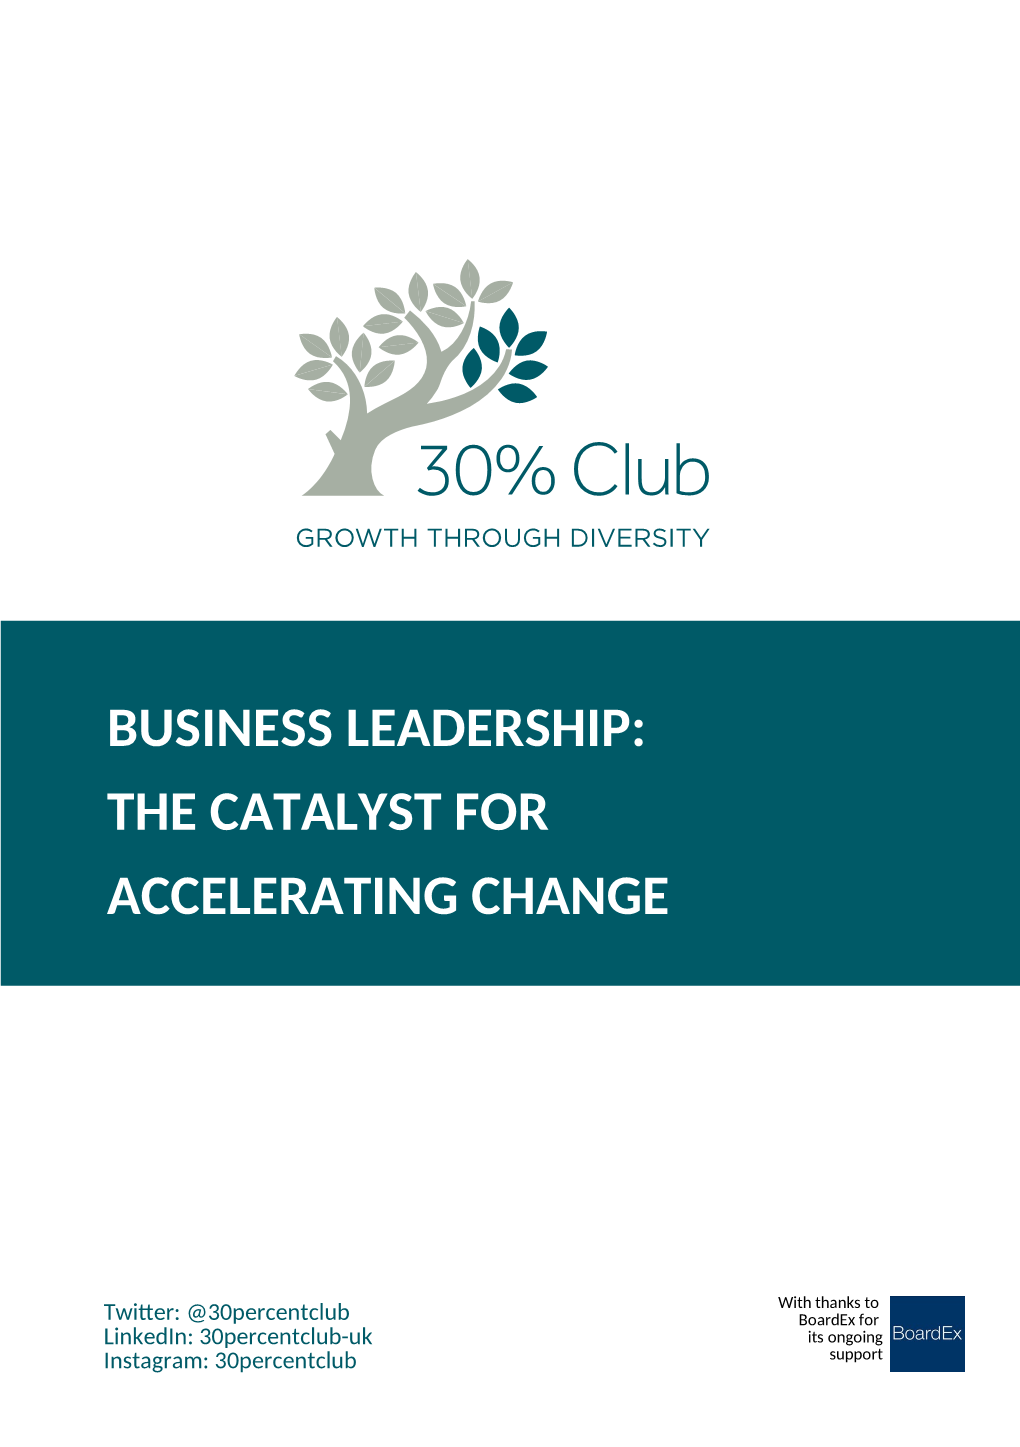 Business Leadership: the Catalyst for Accelerating Change